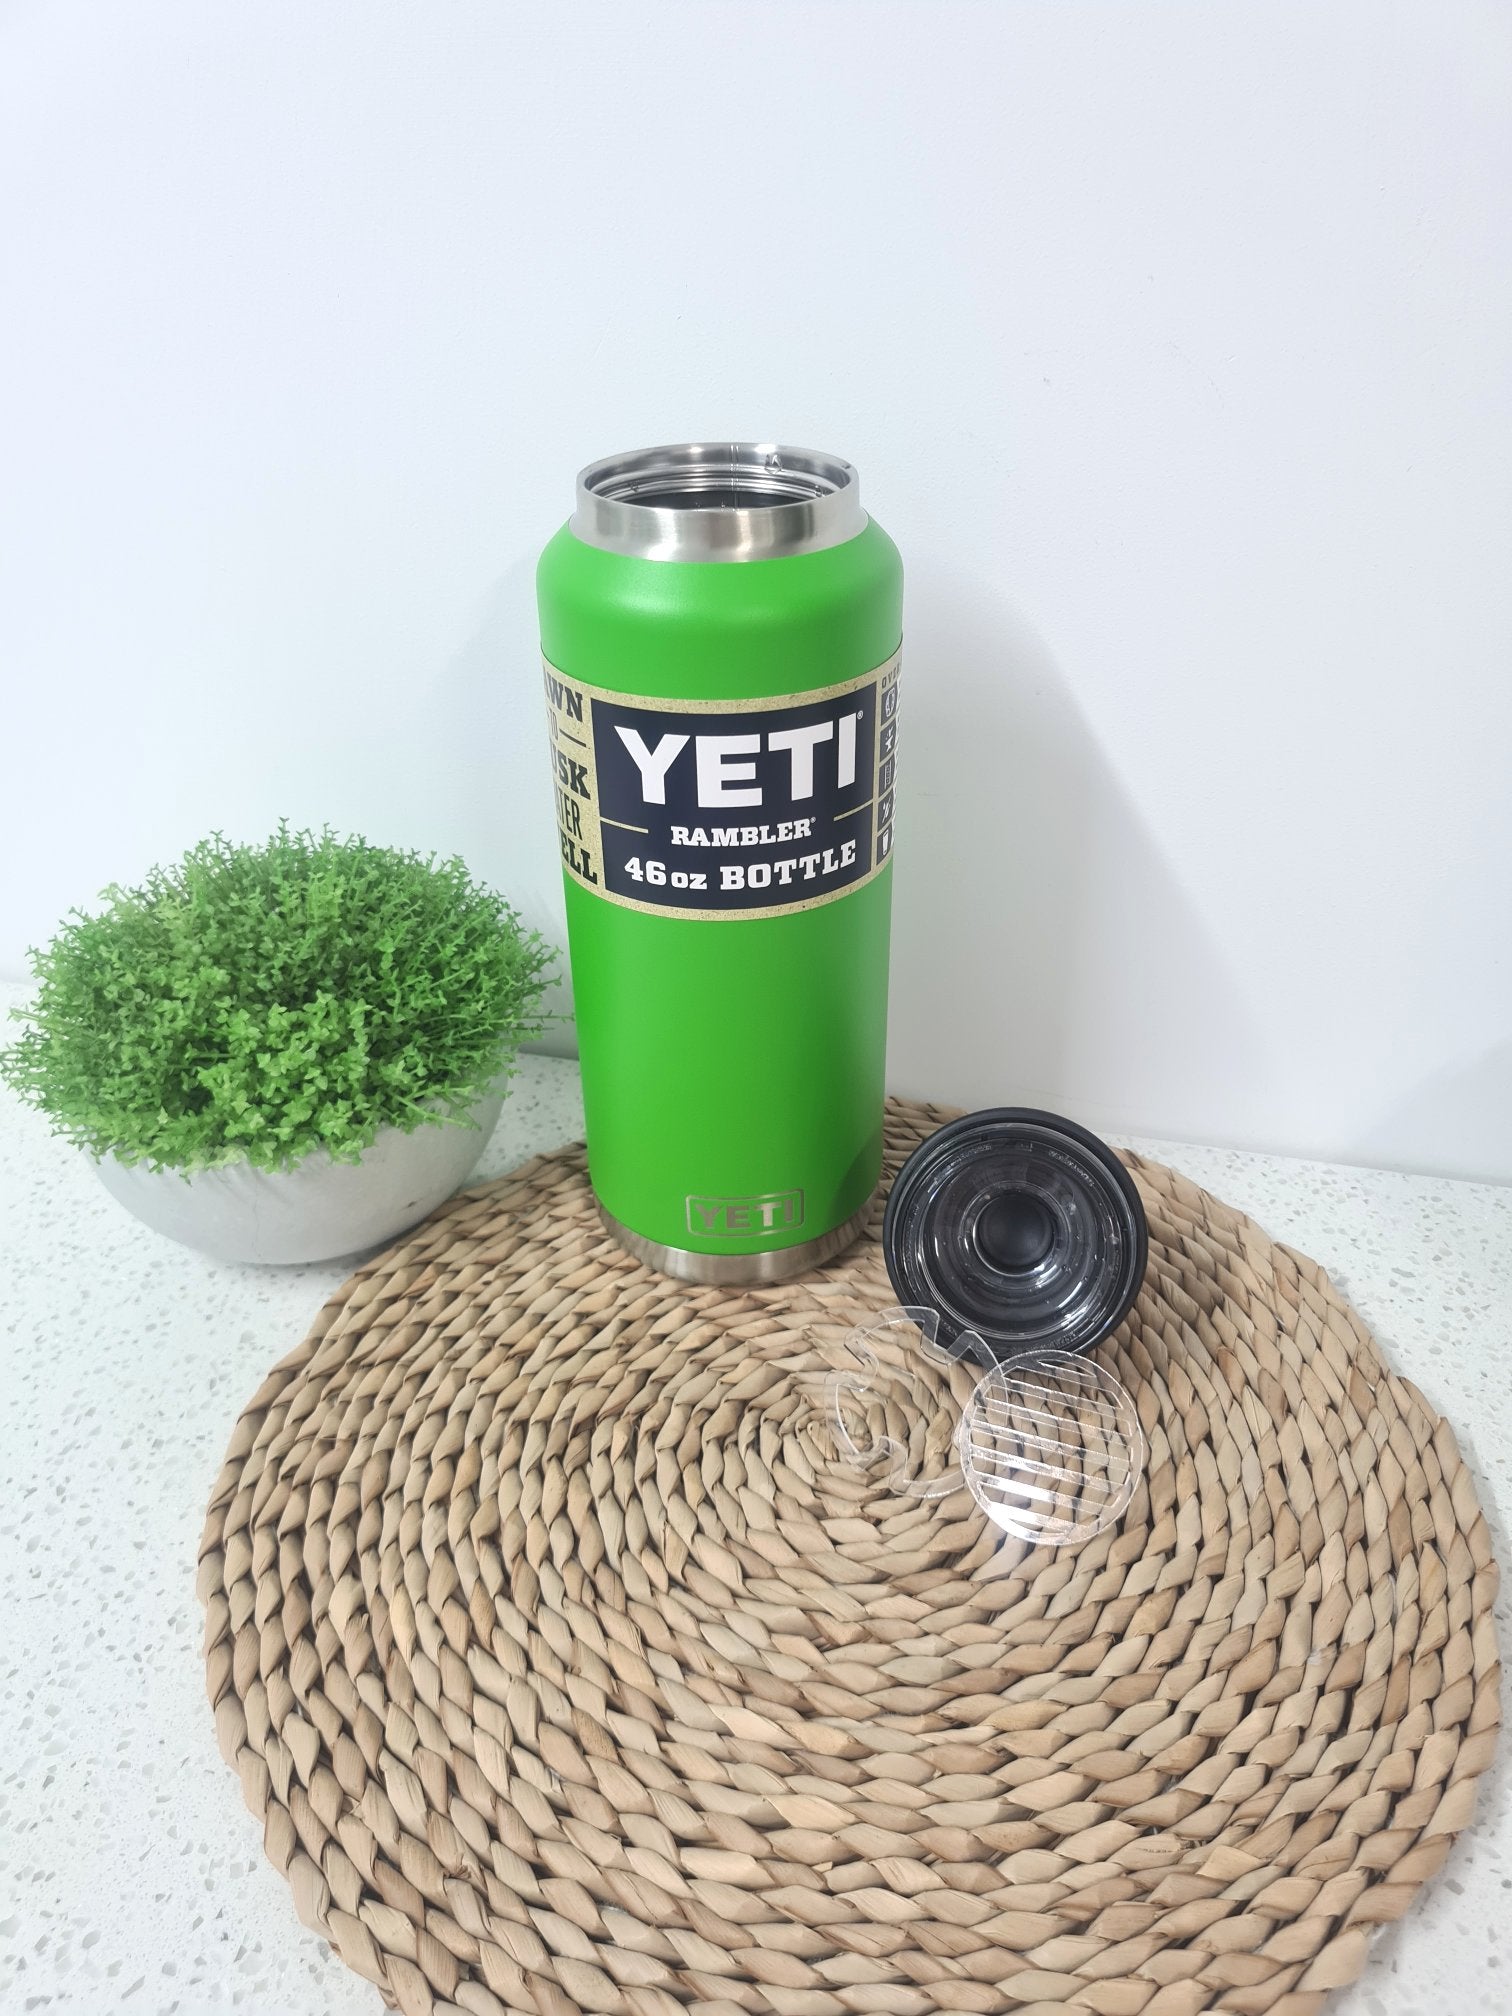 TEYOUYI 2Pcs Ice Strainer Blocker for YETI Rambler Bottle Chug Cap-Prevent  Penetrating Cubed or Crushed Ice during a Drink-Fits 18, 26, 36OZ Bottles